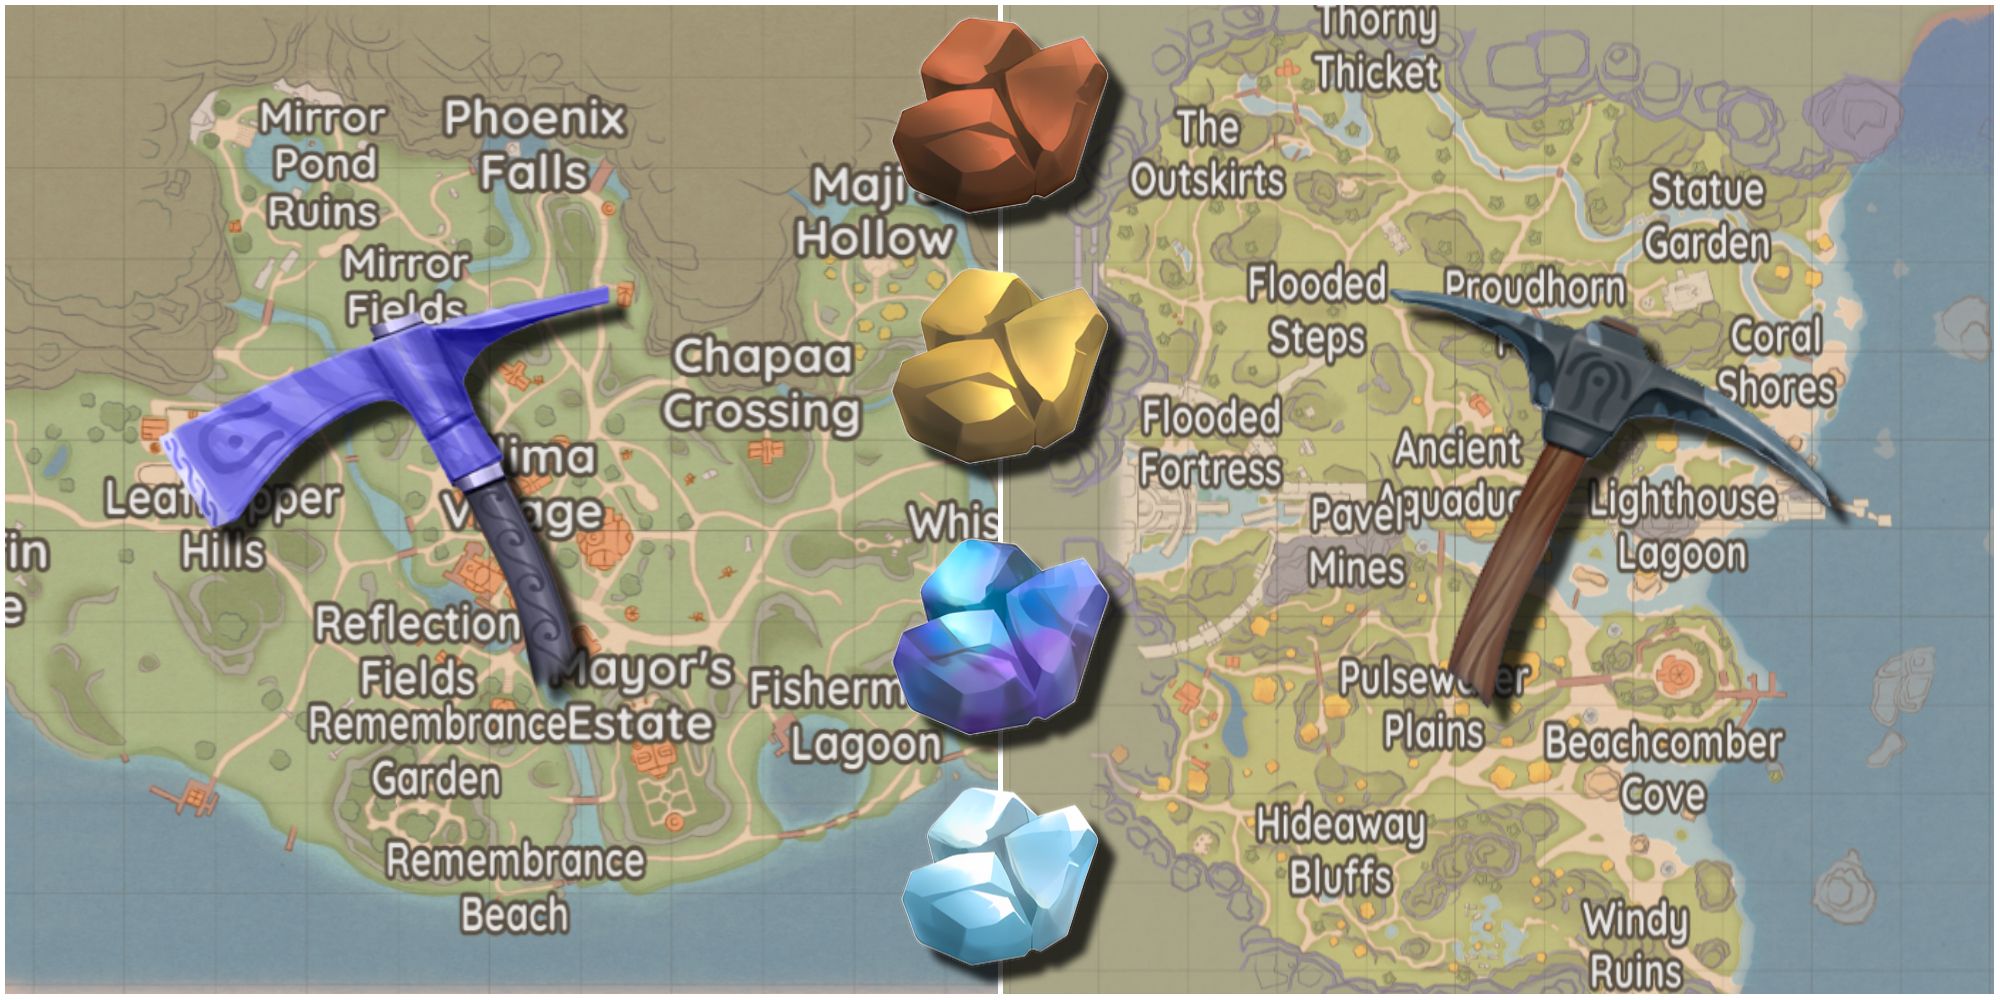 The map of Kilima and Bahari Bay with four ores and two picks needed for mining in these specific locations